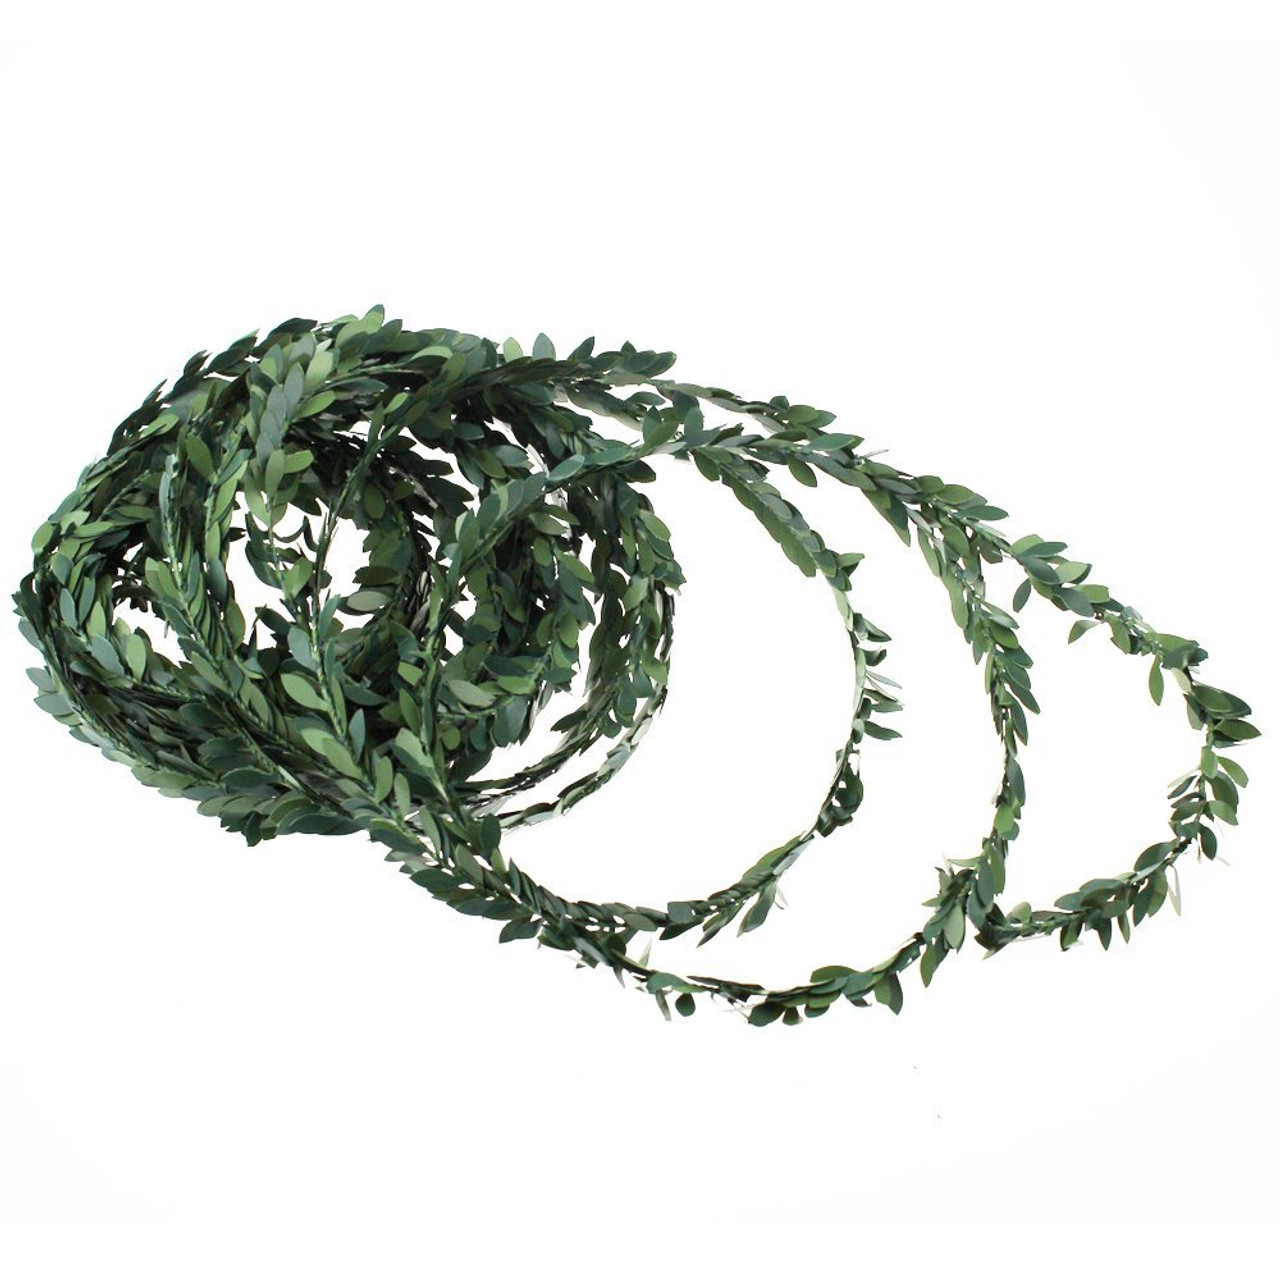 LJY 32.8 Yards Artificial Ivy Garland Foliage Green Leaves Fake Vine for  Wedding Party Ceremony DIY Headbands